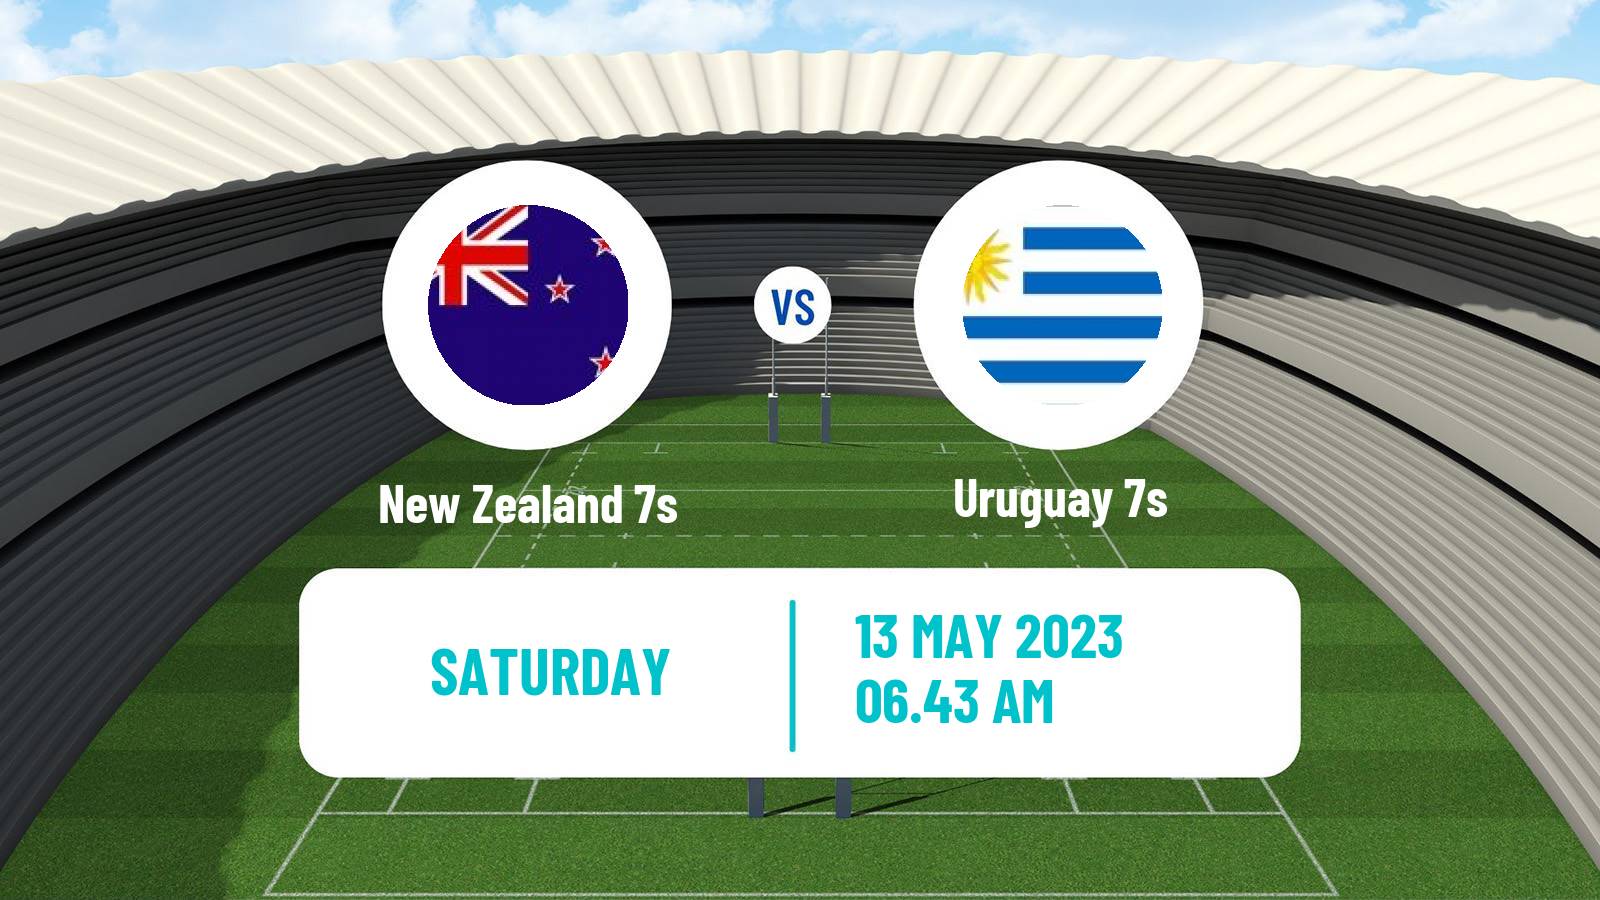 Rugby union Sevens World Series - France New Zealand 7s - Uruguay 7s